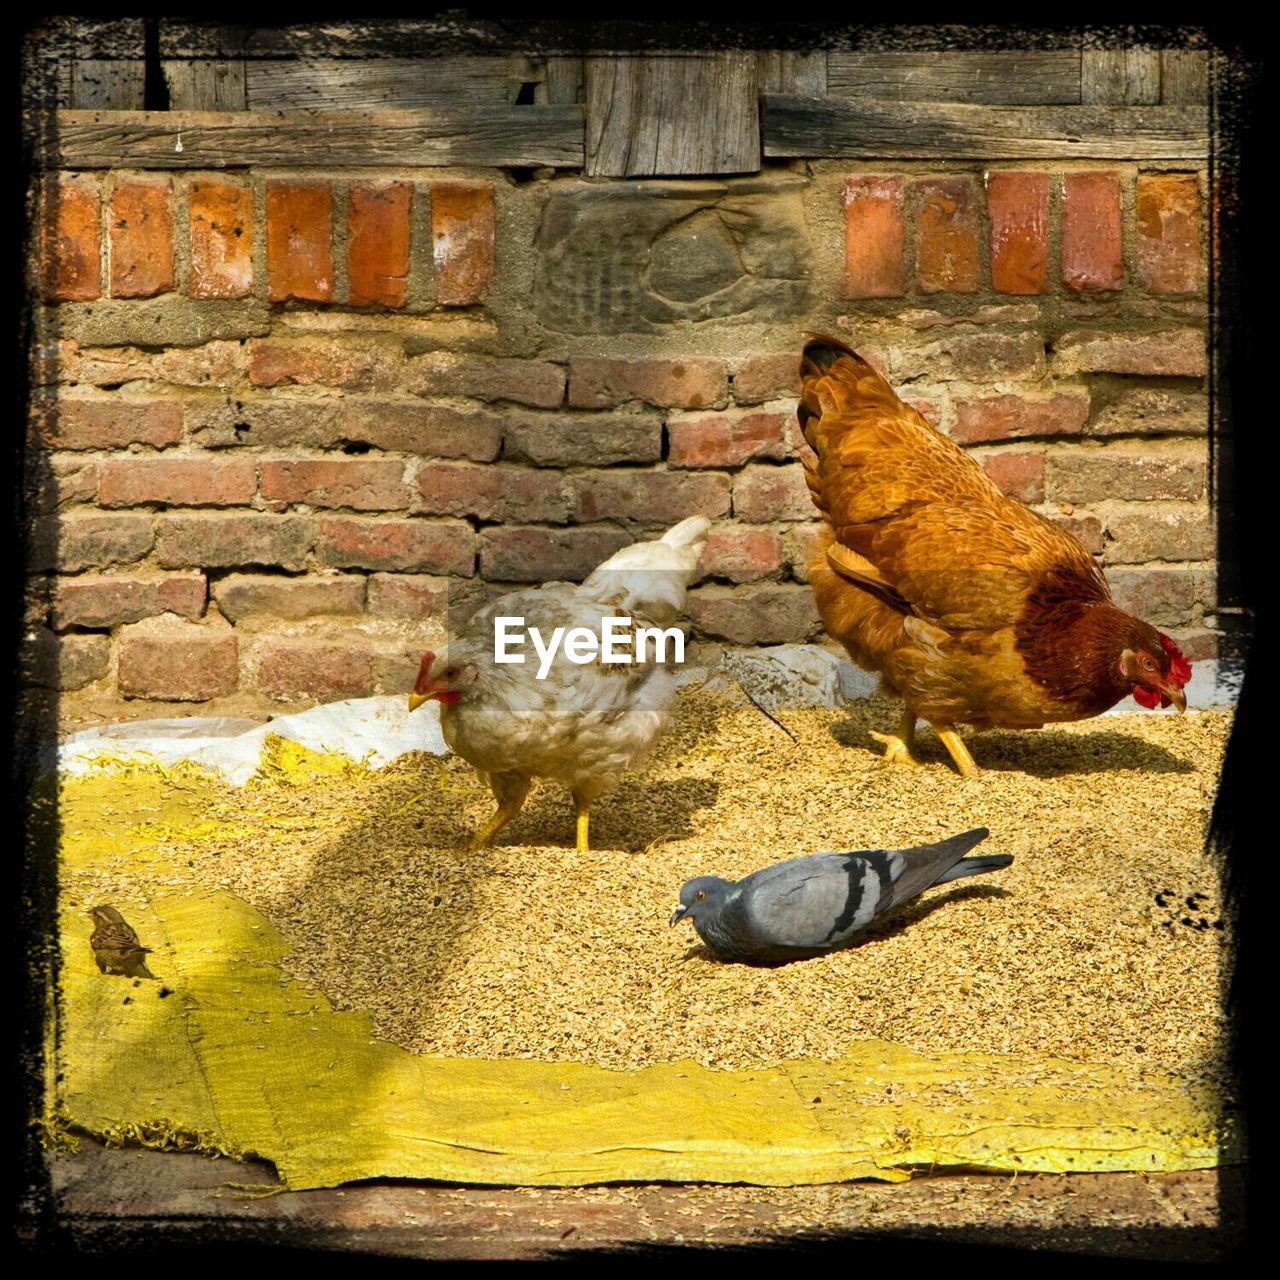 Hens pecking at grain on the ground